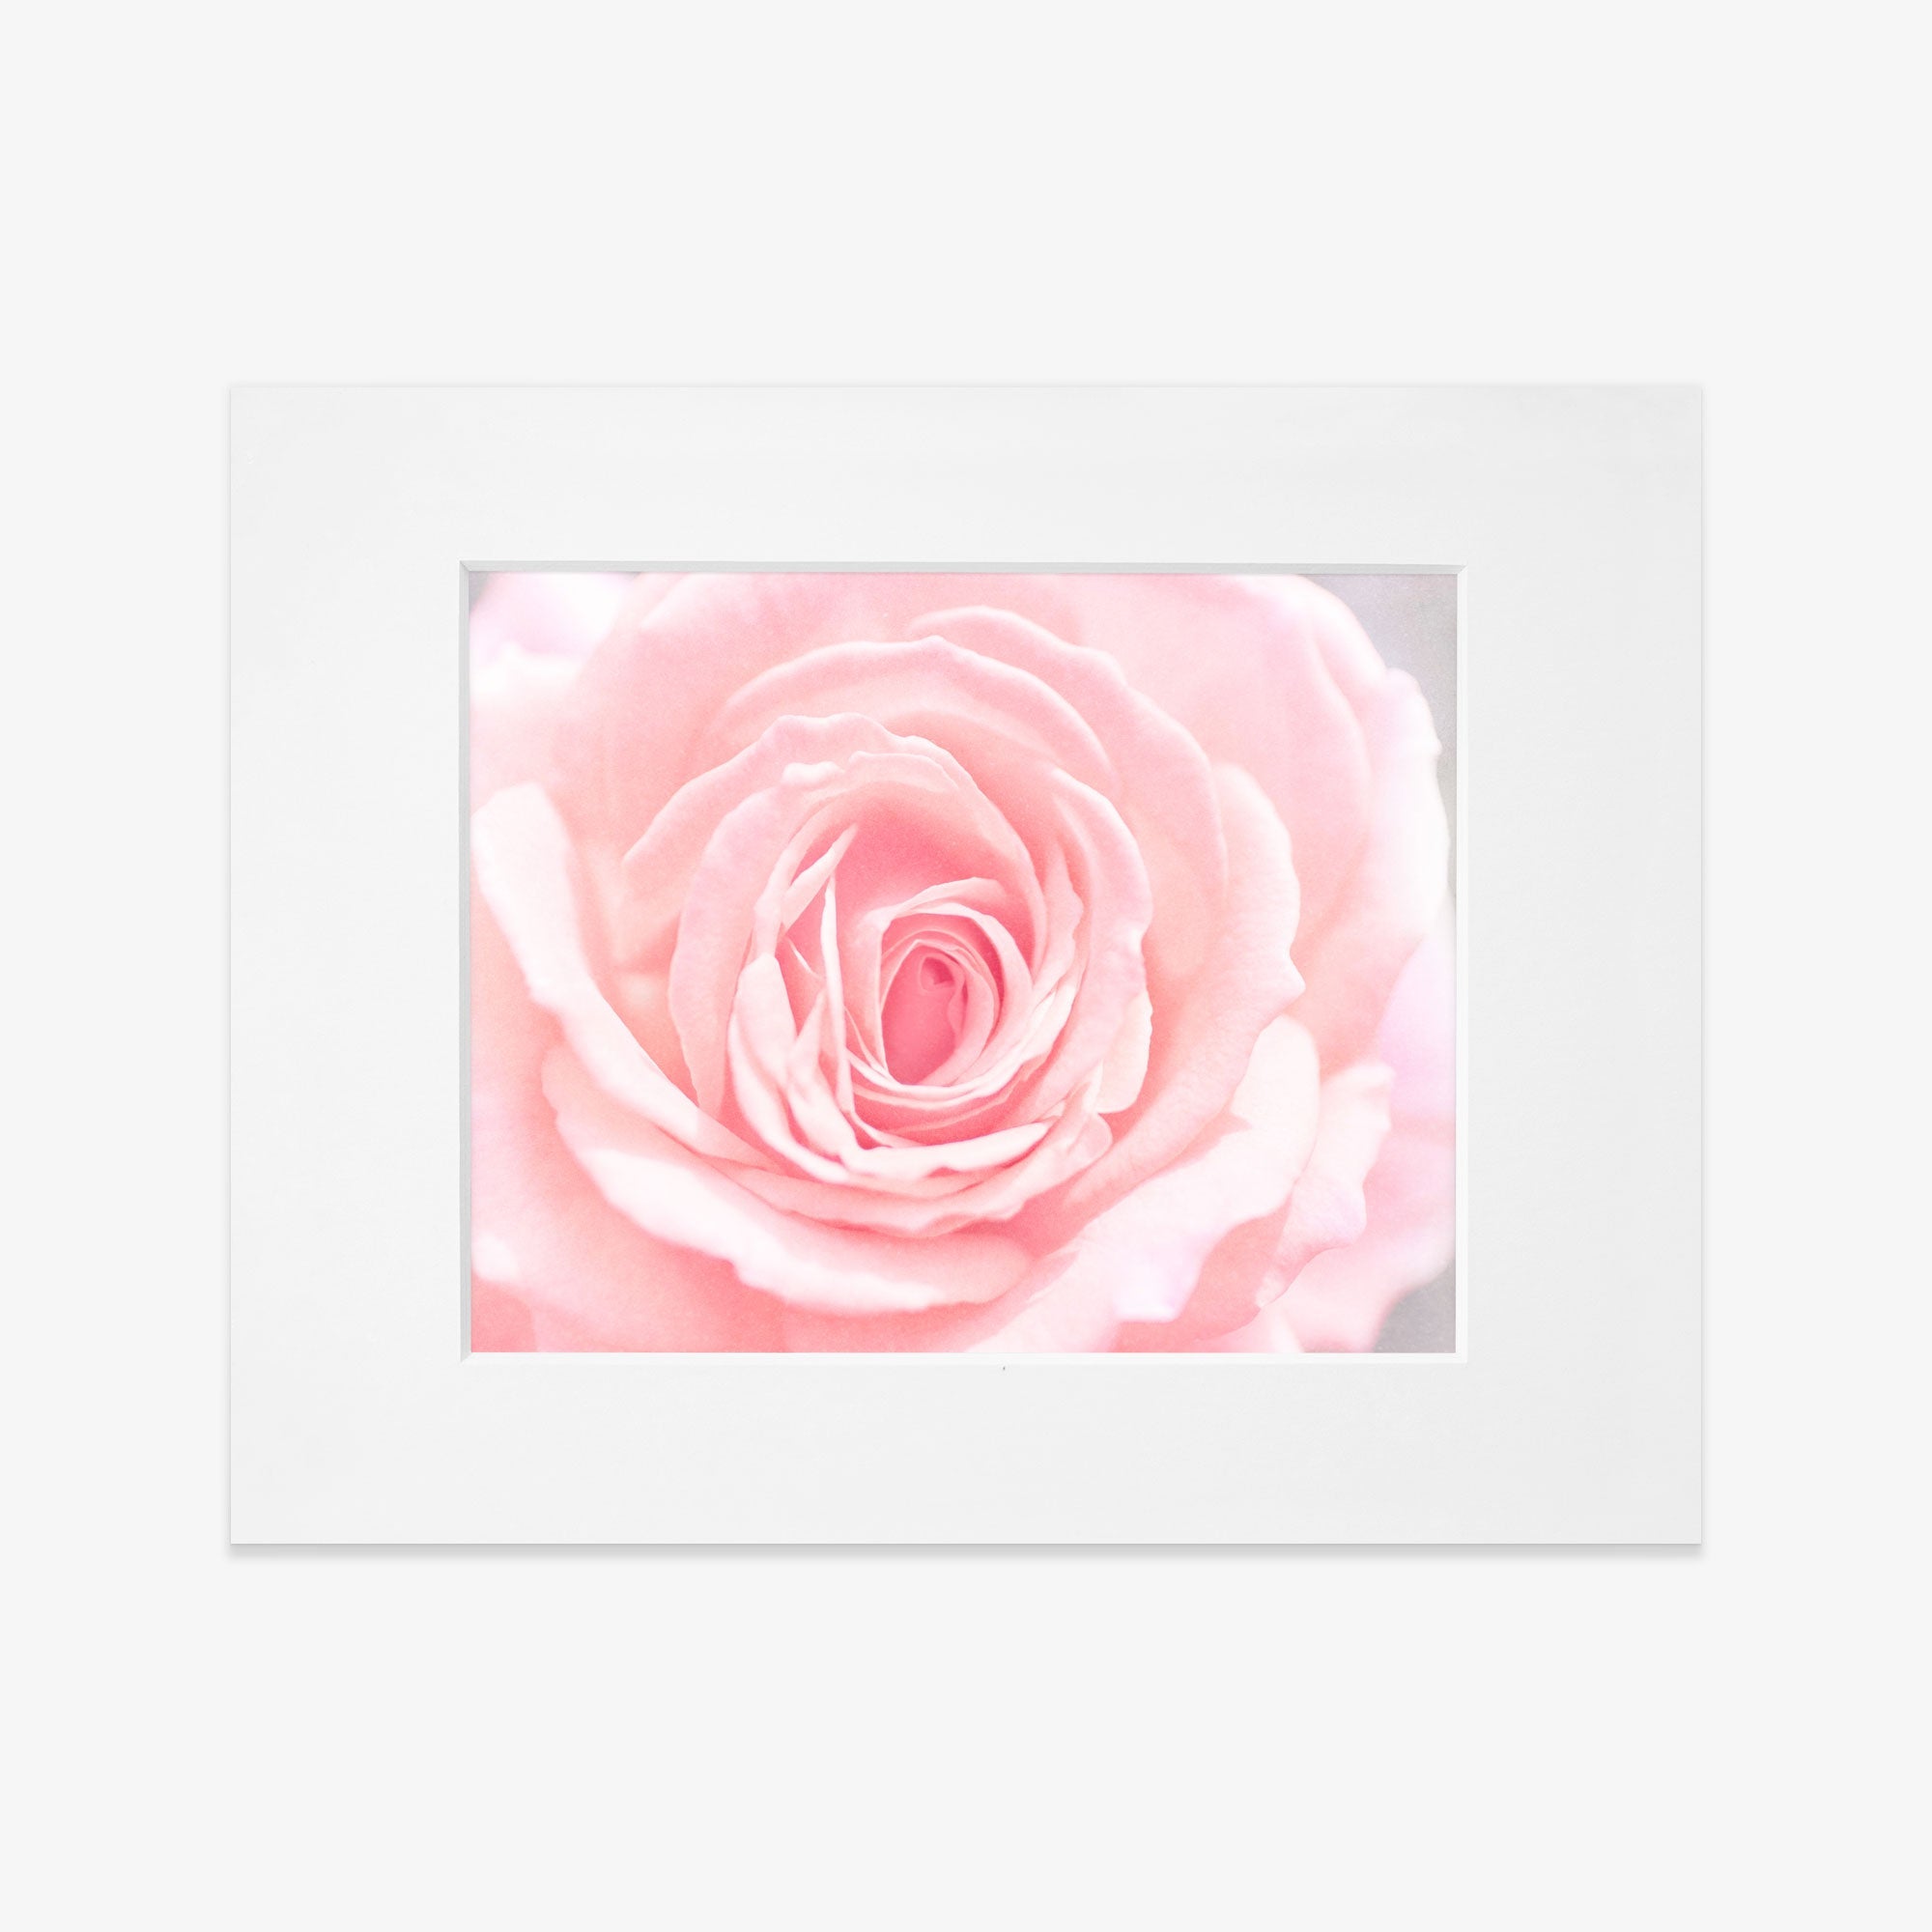 A framed photograph of a Pink Rose Print by Offley Green, printed on archival photographic paper, highlighting its delicate petals and intricate layers.